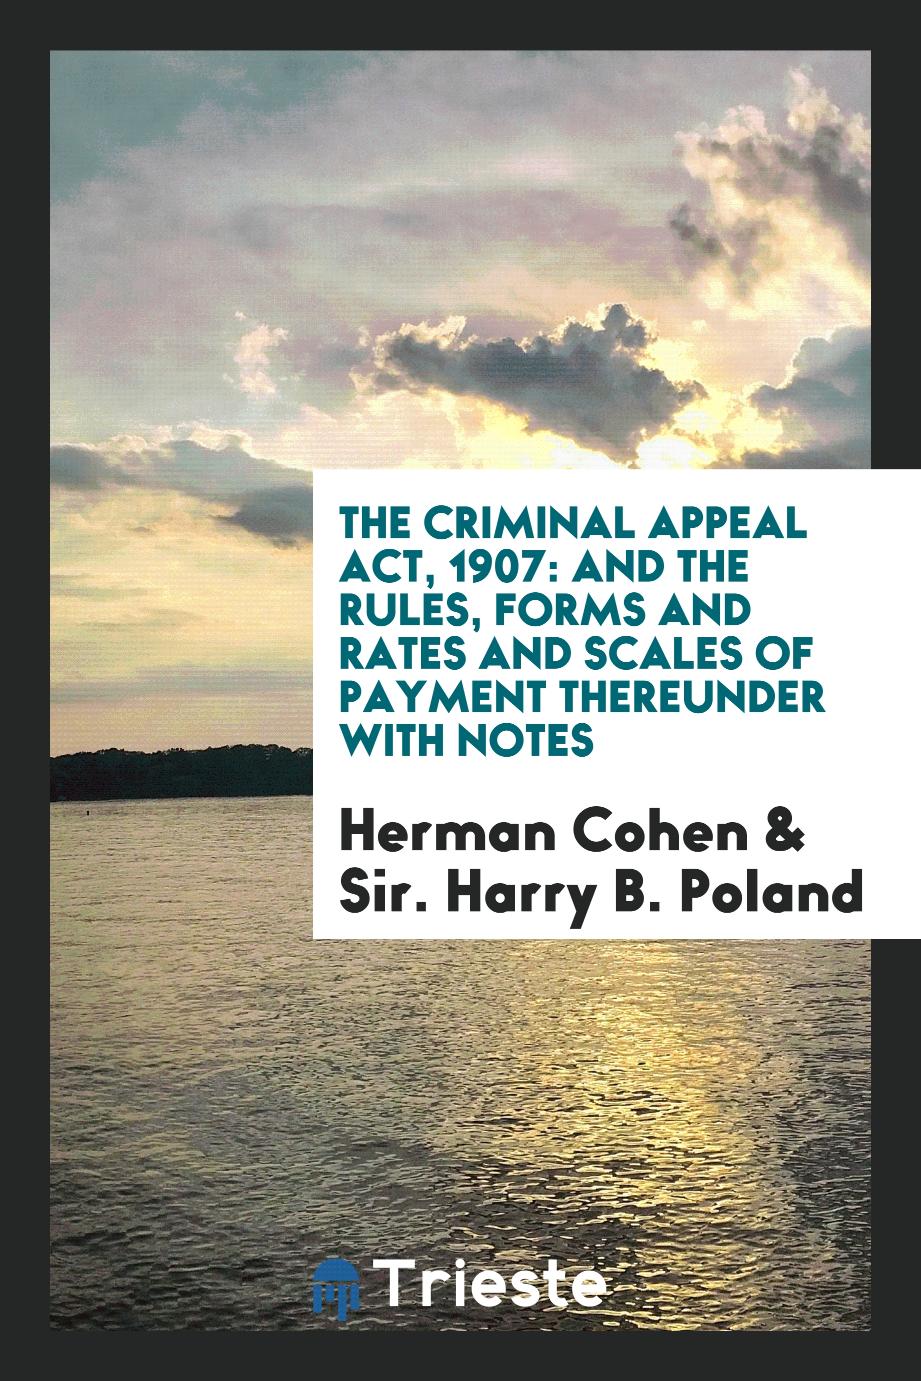 The Criminal Appeal Act, 1907: And the Rules, Forms and Rates and Scales of Payment Thereunder with Notes